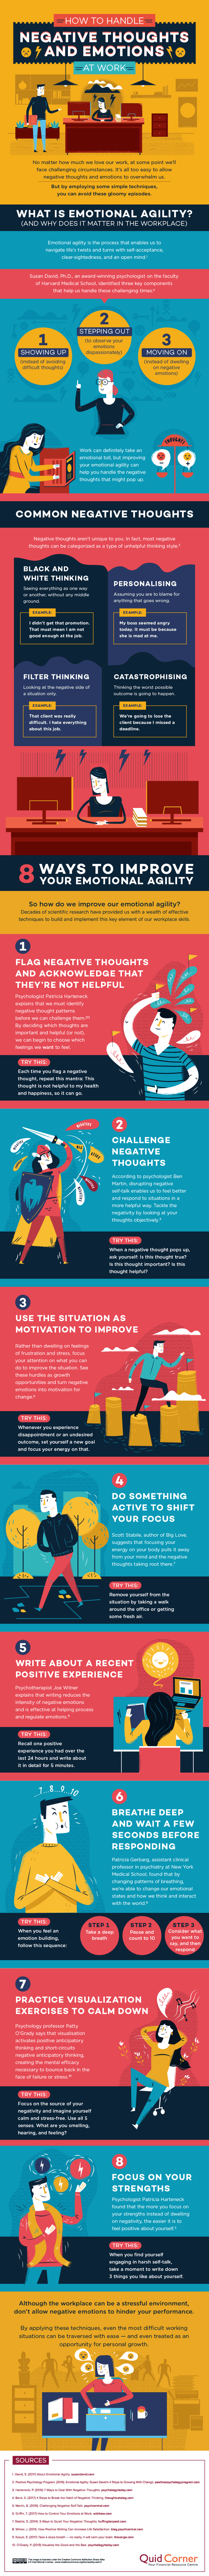 Design_How-to-Handle-Negative-Thoughts-and-Emotions-at-Work